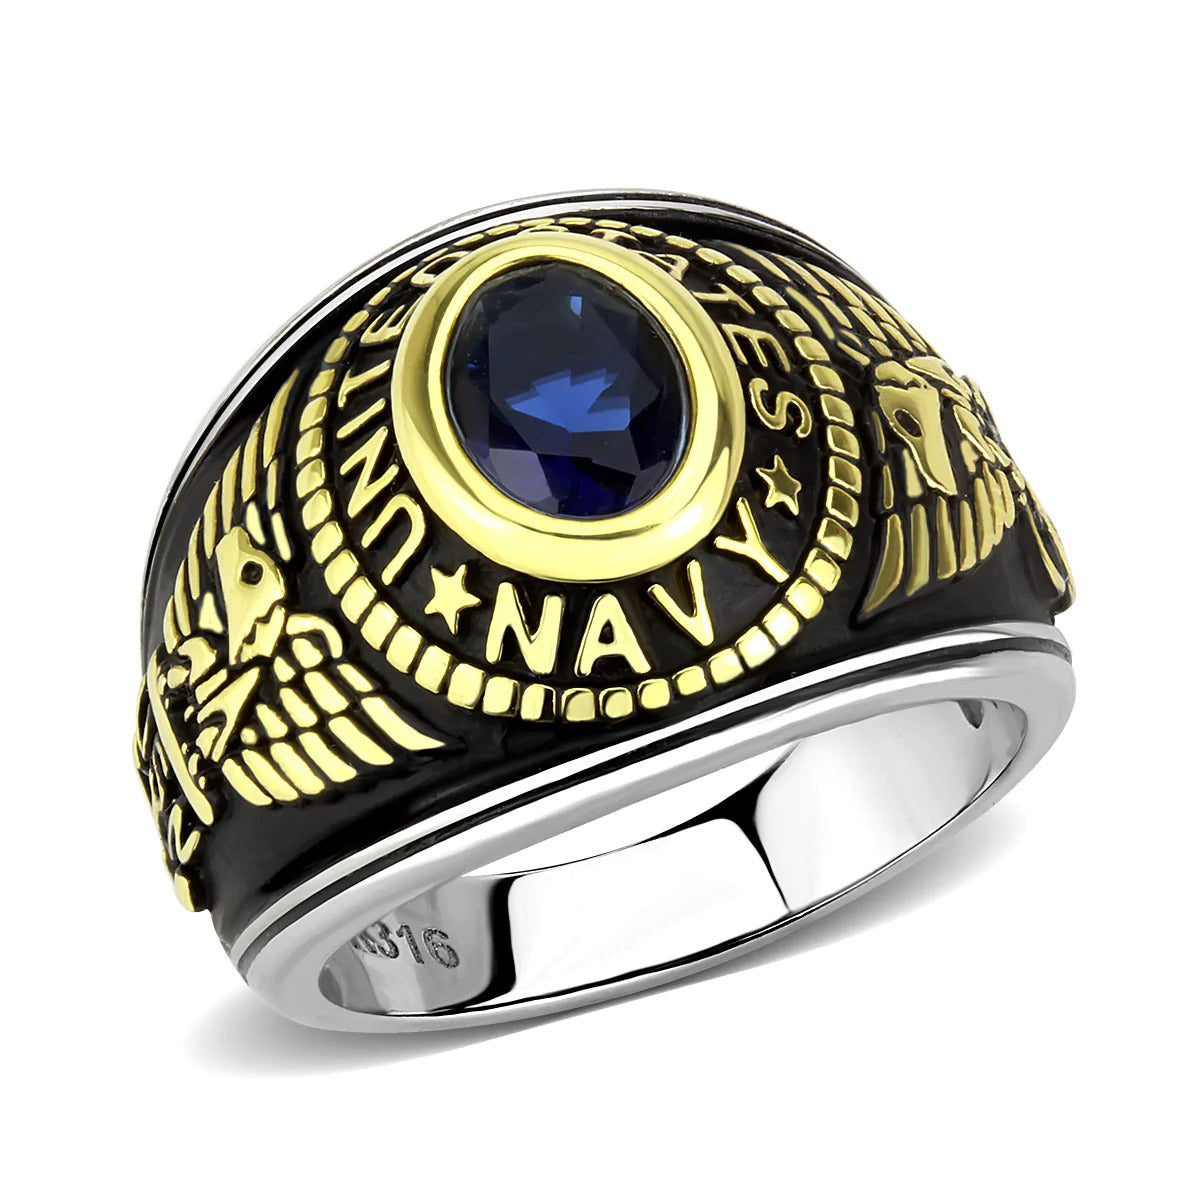 CJ3726 Wholesale Unisex Stainless Steel Two-Tone IP Gold Synthetic Montana United States Navy Military Ring